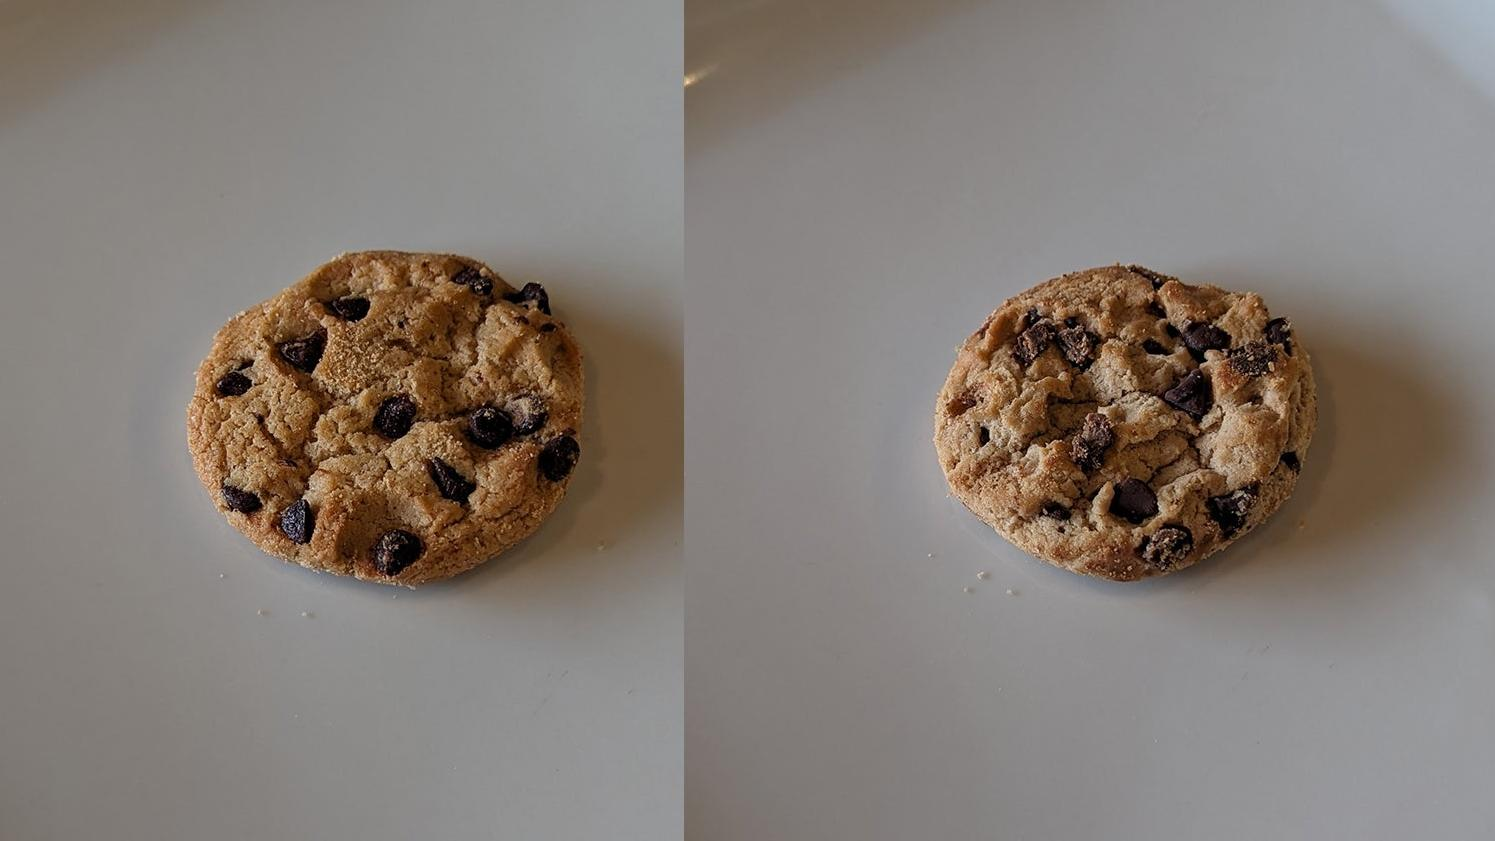 Two Chips Ahoy chocolate chip cookies side by side